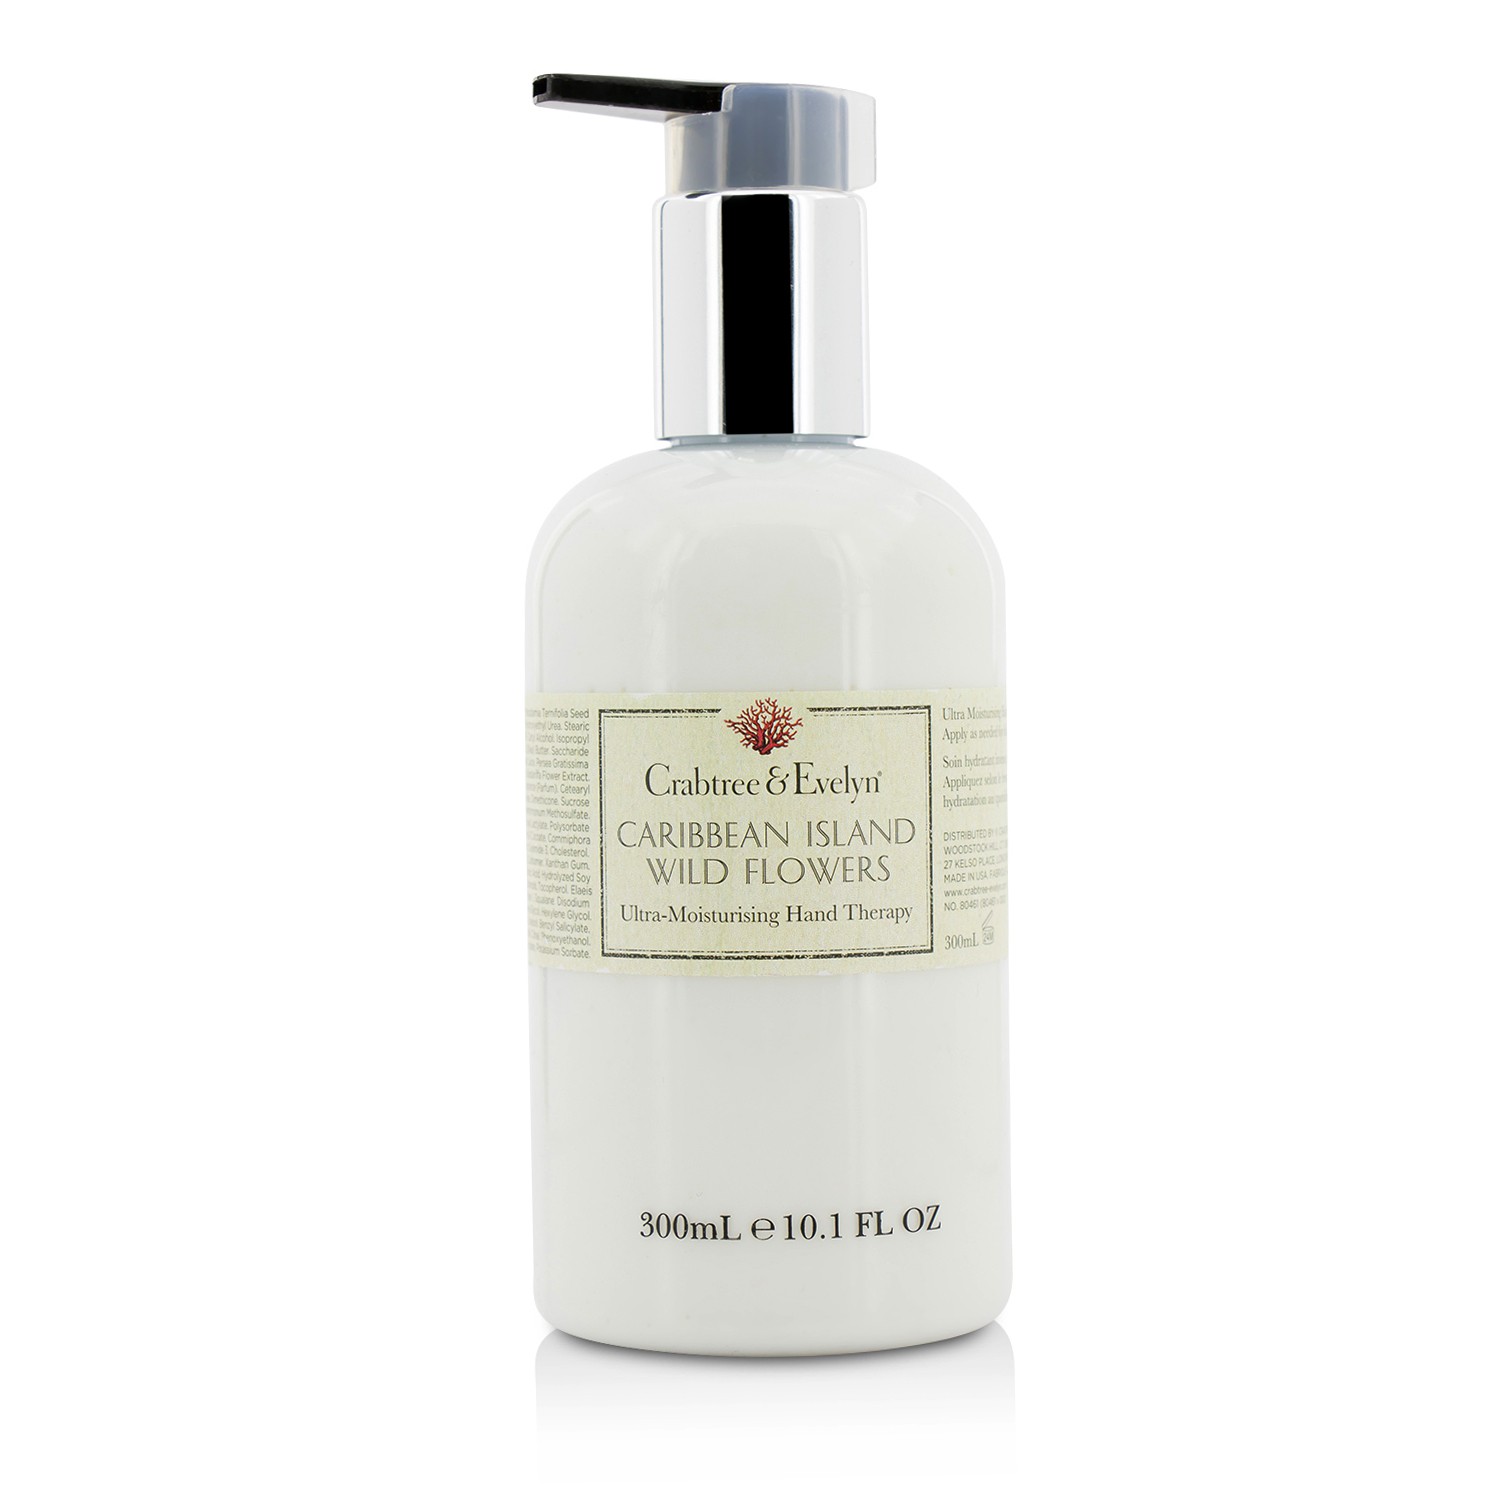 Caribbean Island Wild Flowers Ultra-Moisturising Hand Therapy Crabtree & Evelyn Image